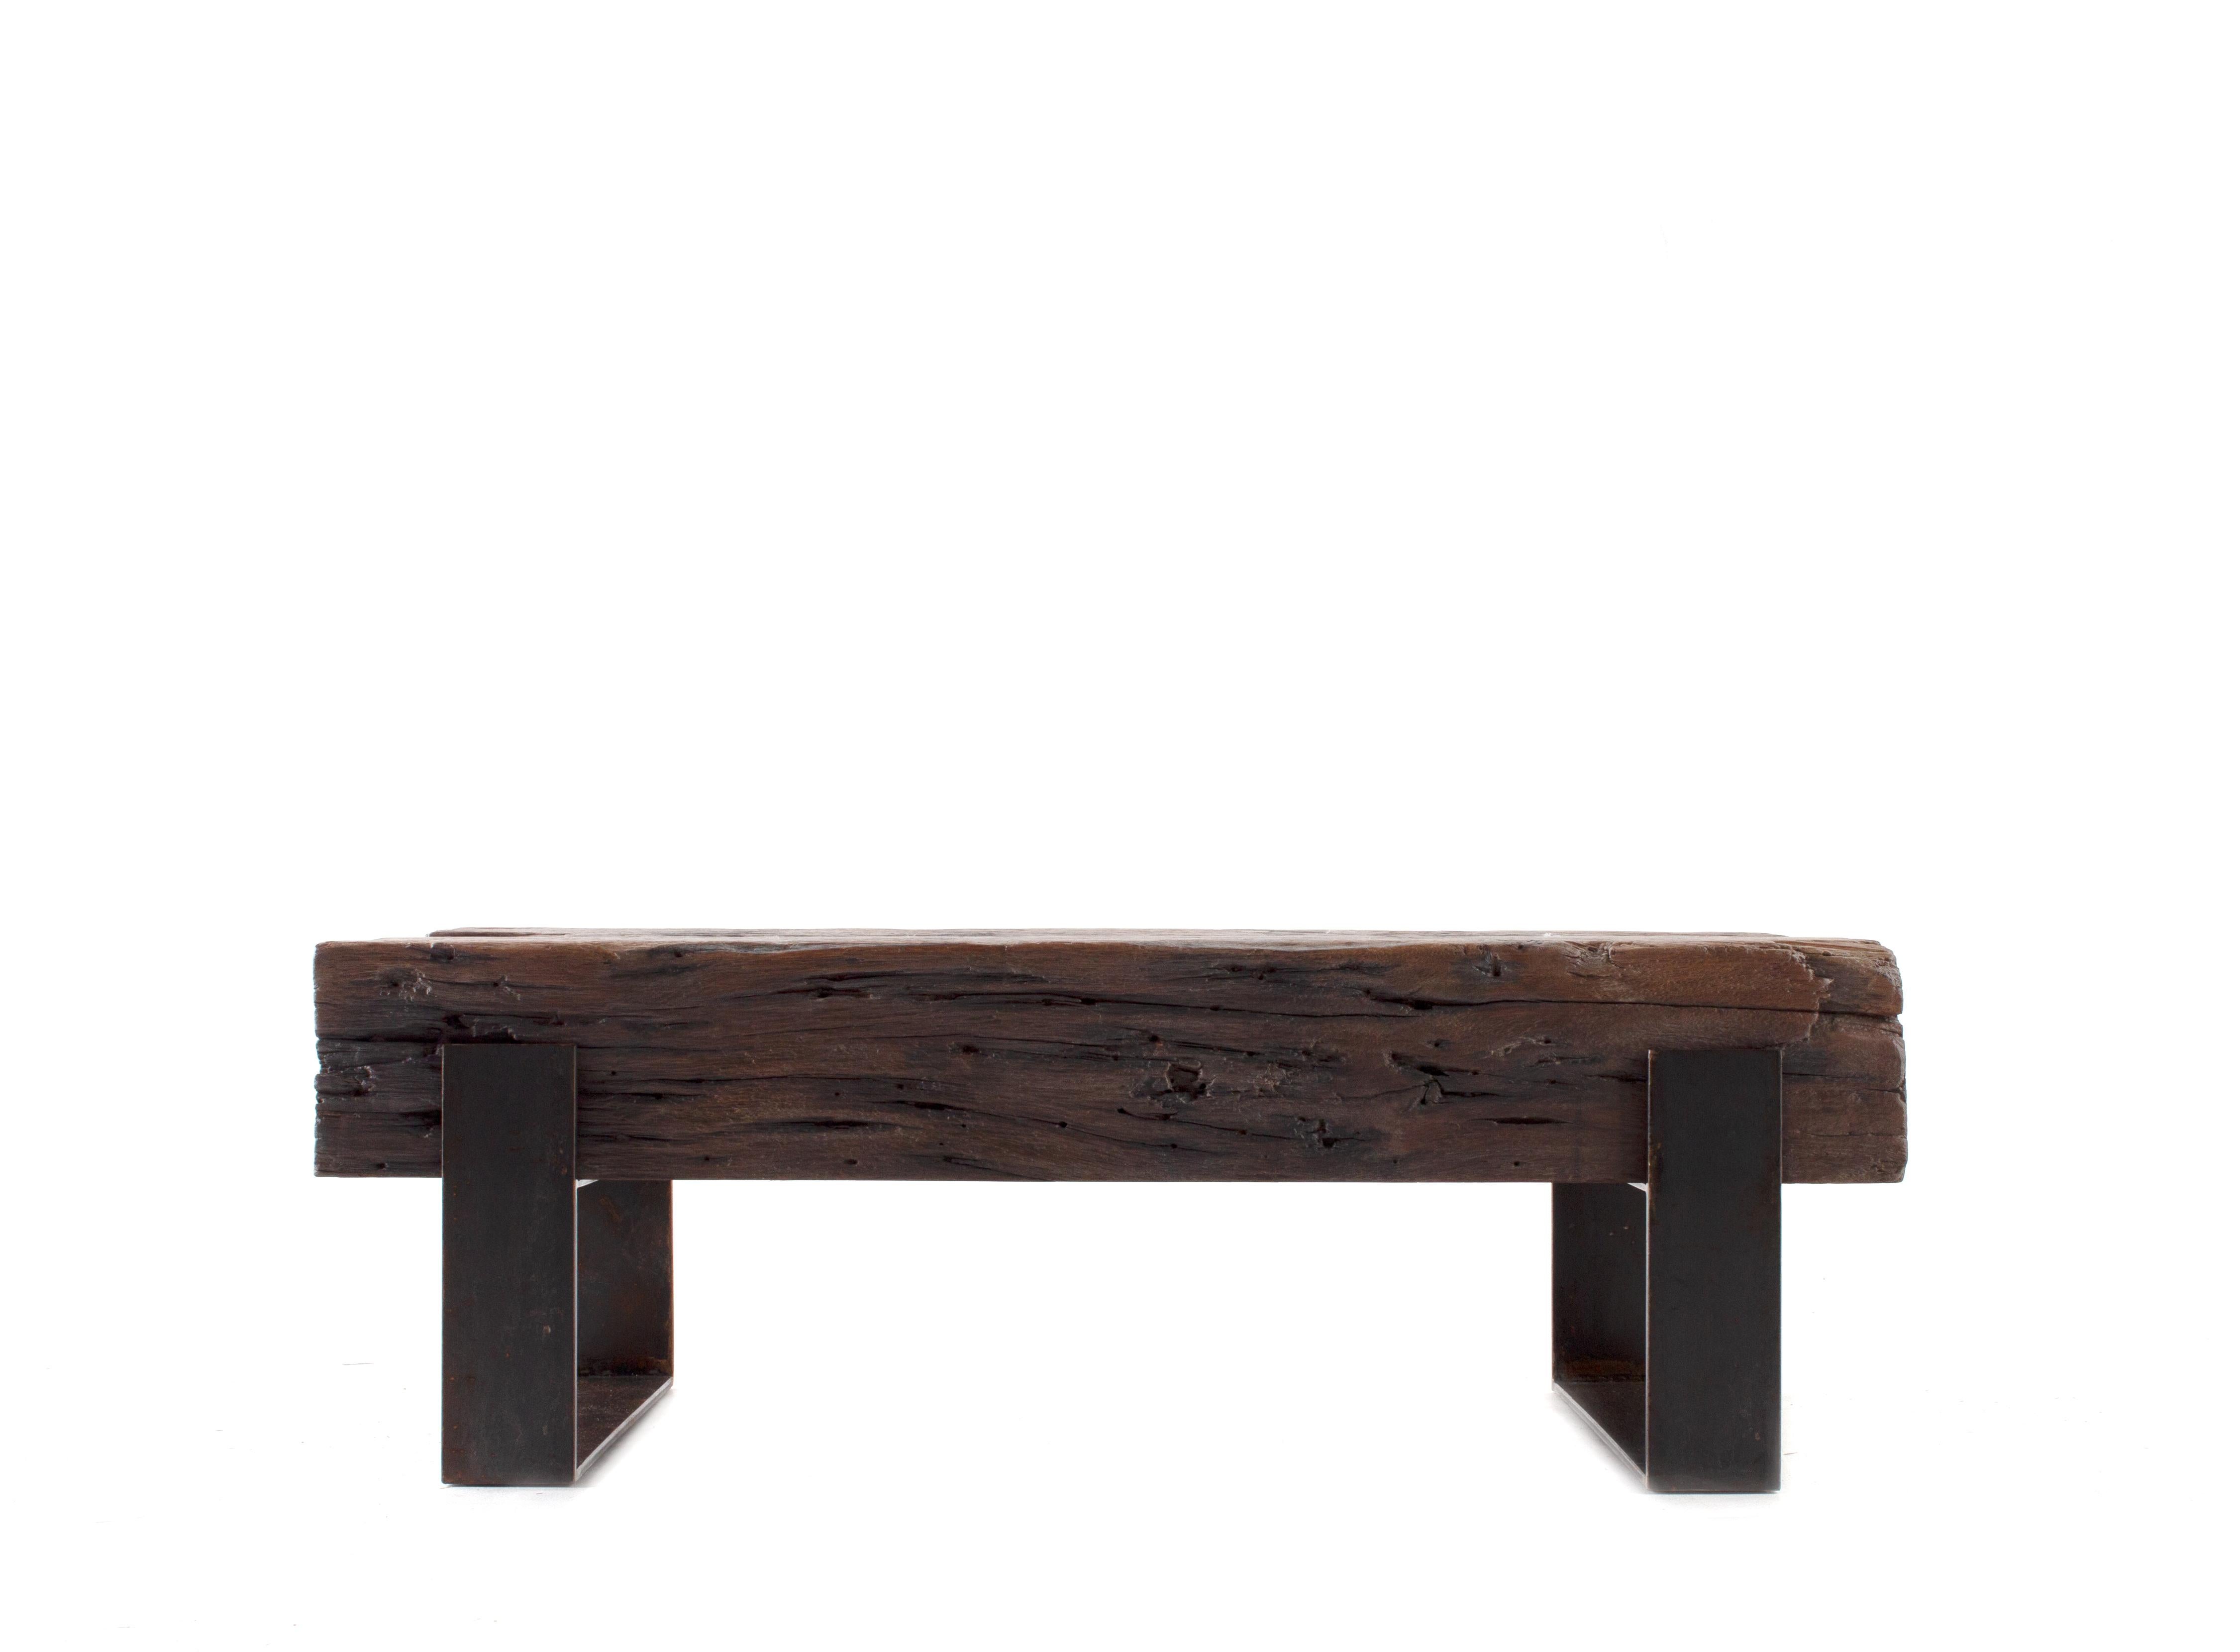 Vintage bound beams coffee table. Sold by Brendan Bass Showroom. Custom orders available through inquiry.